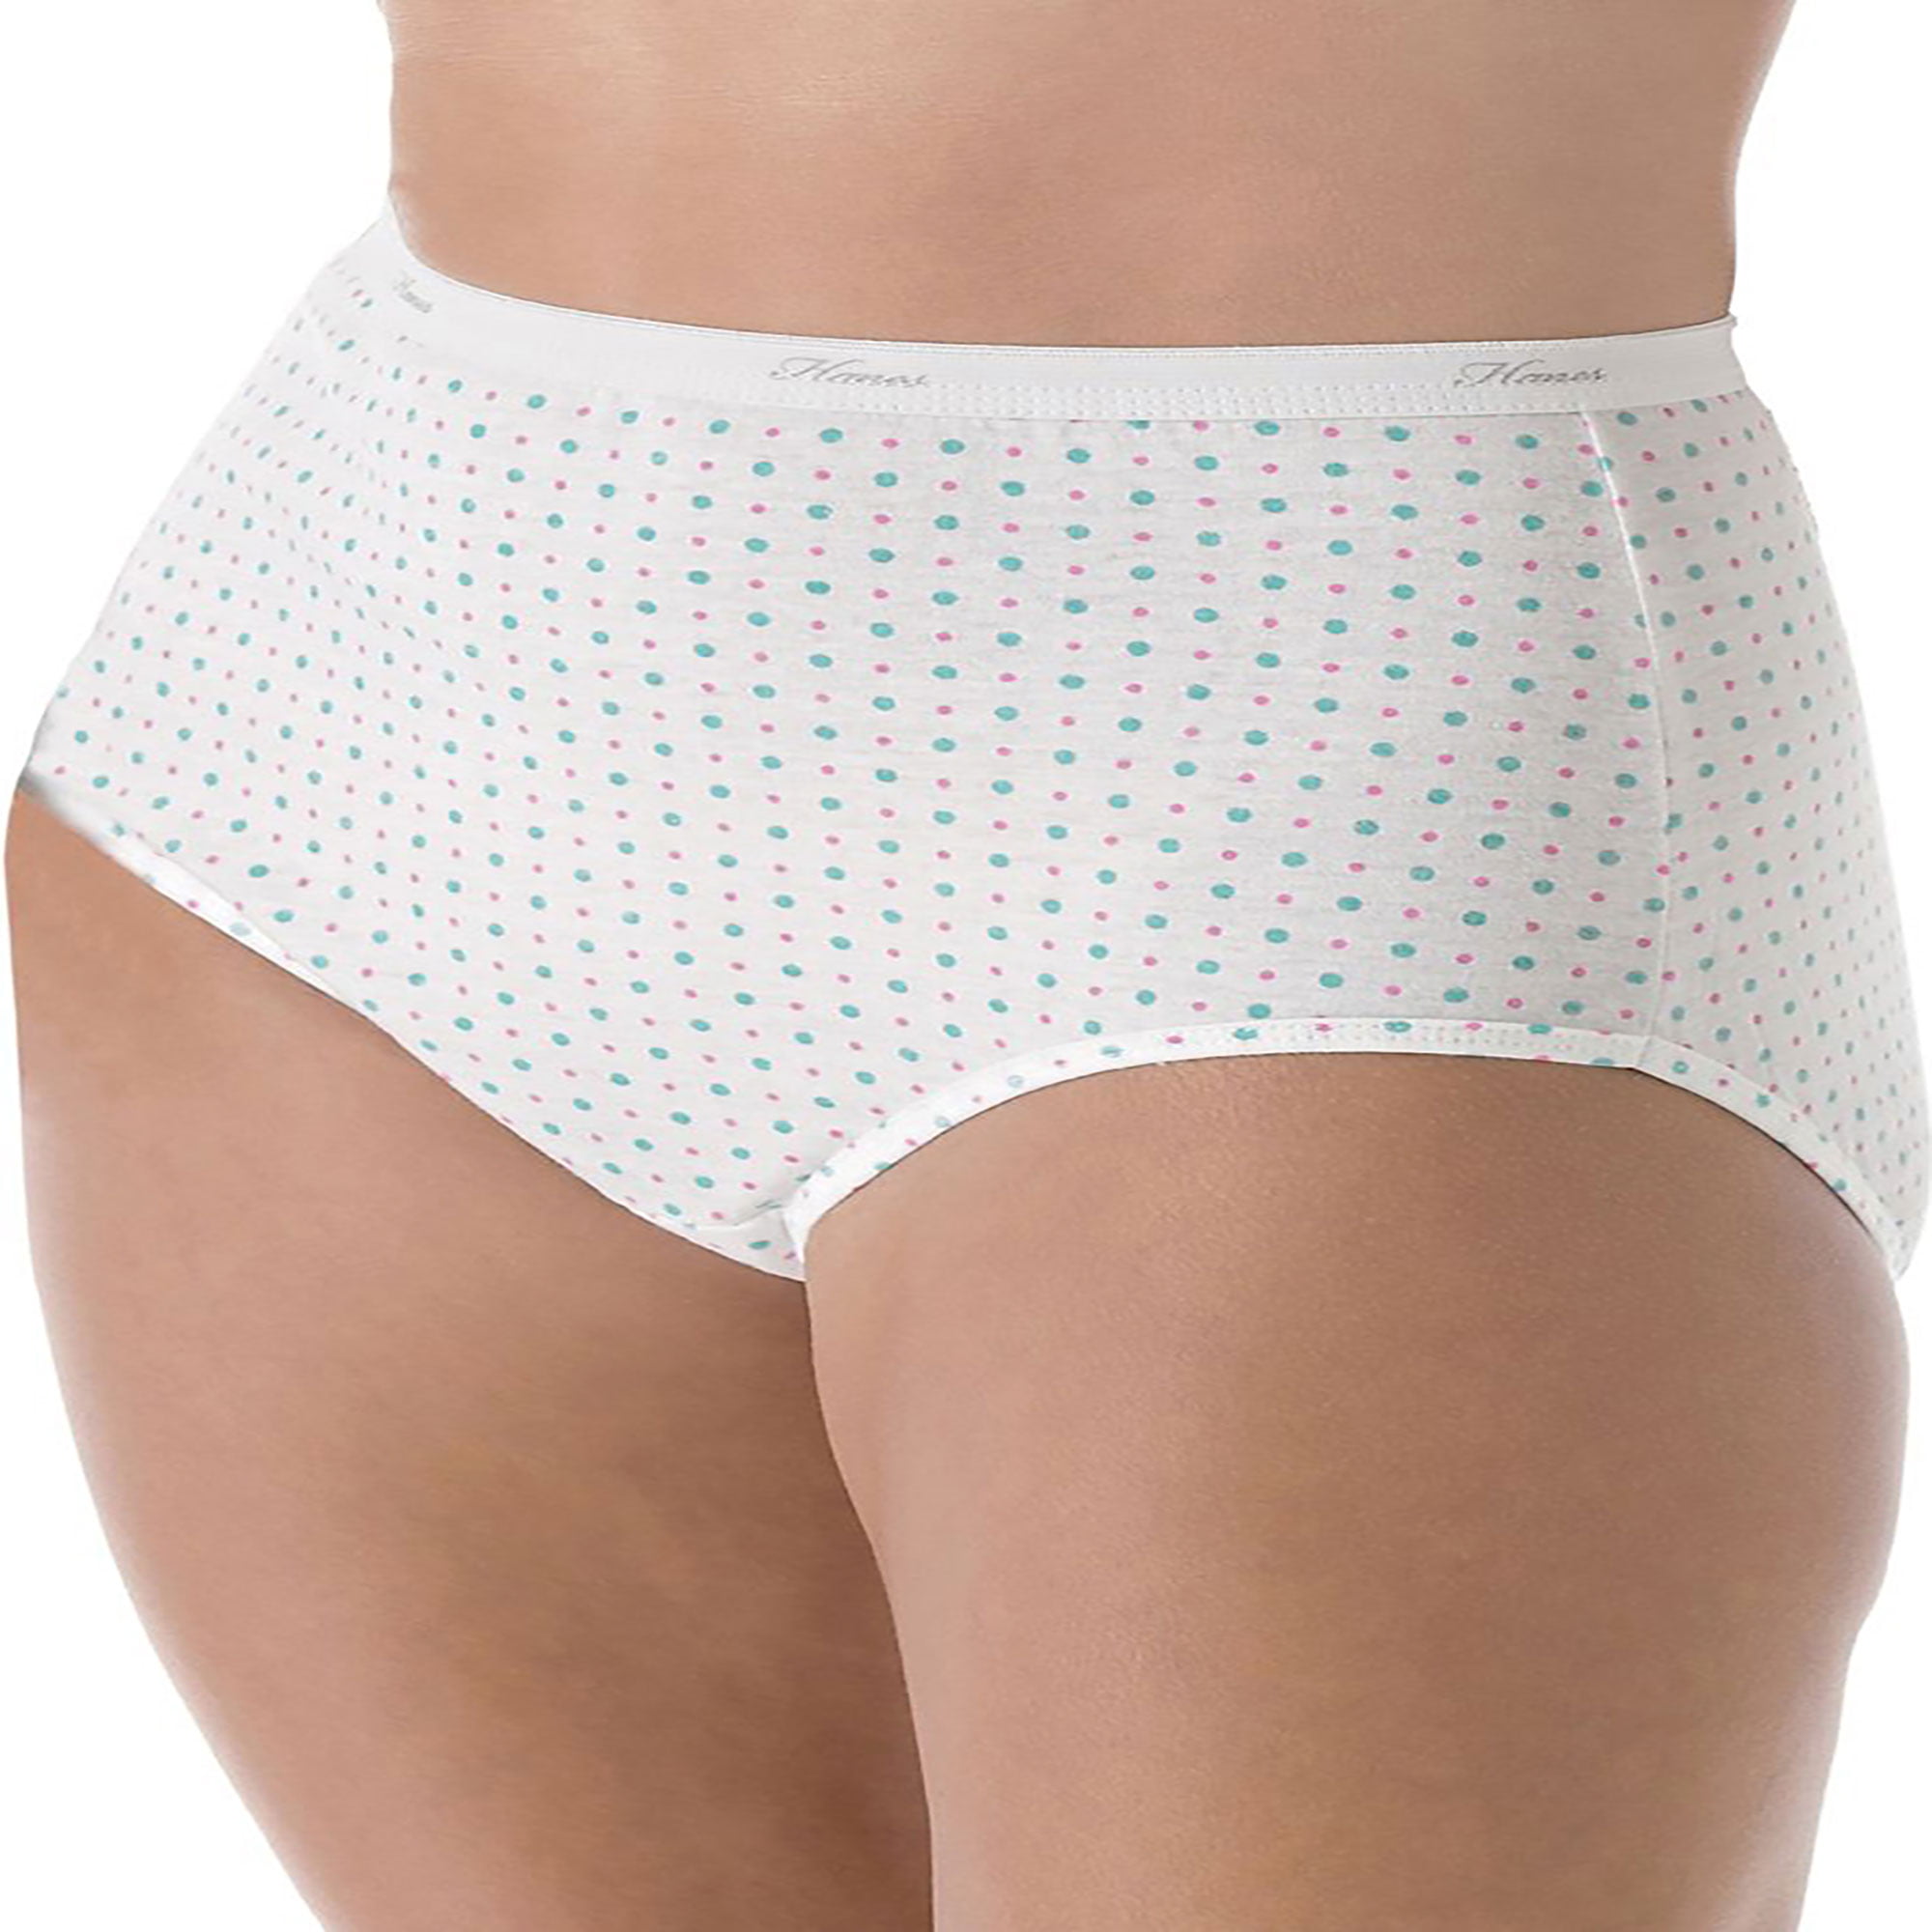 Buy Hanes Women's 6 Pack No Ride Up Low Rise Cotton Brief at